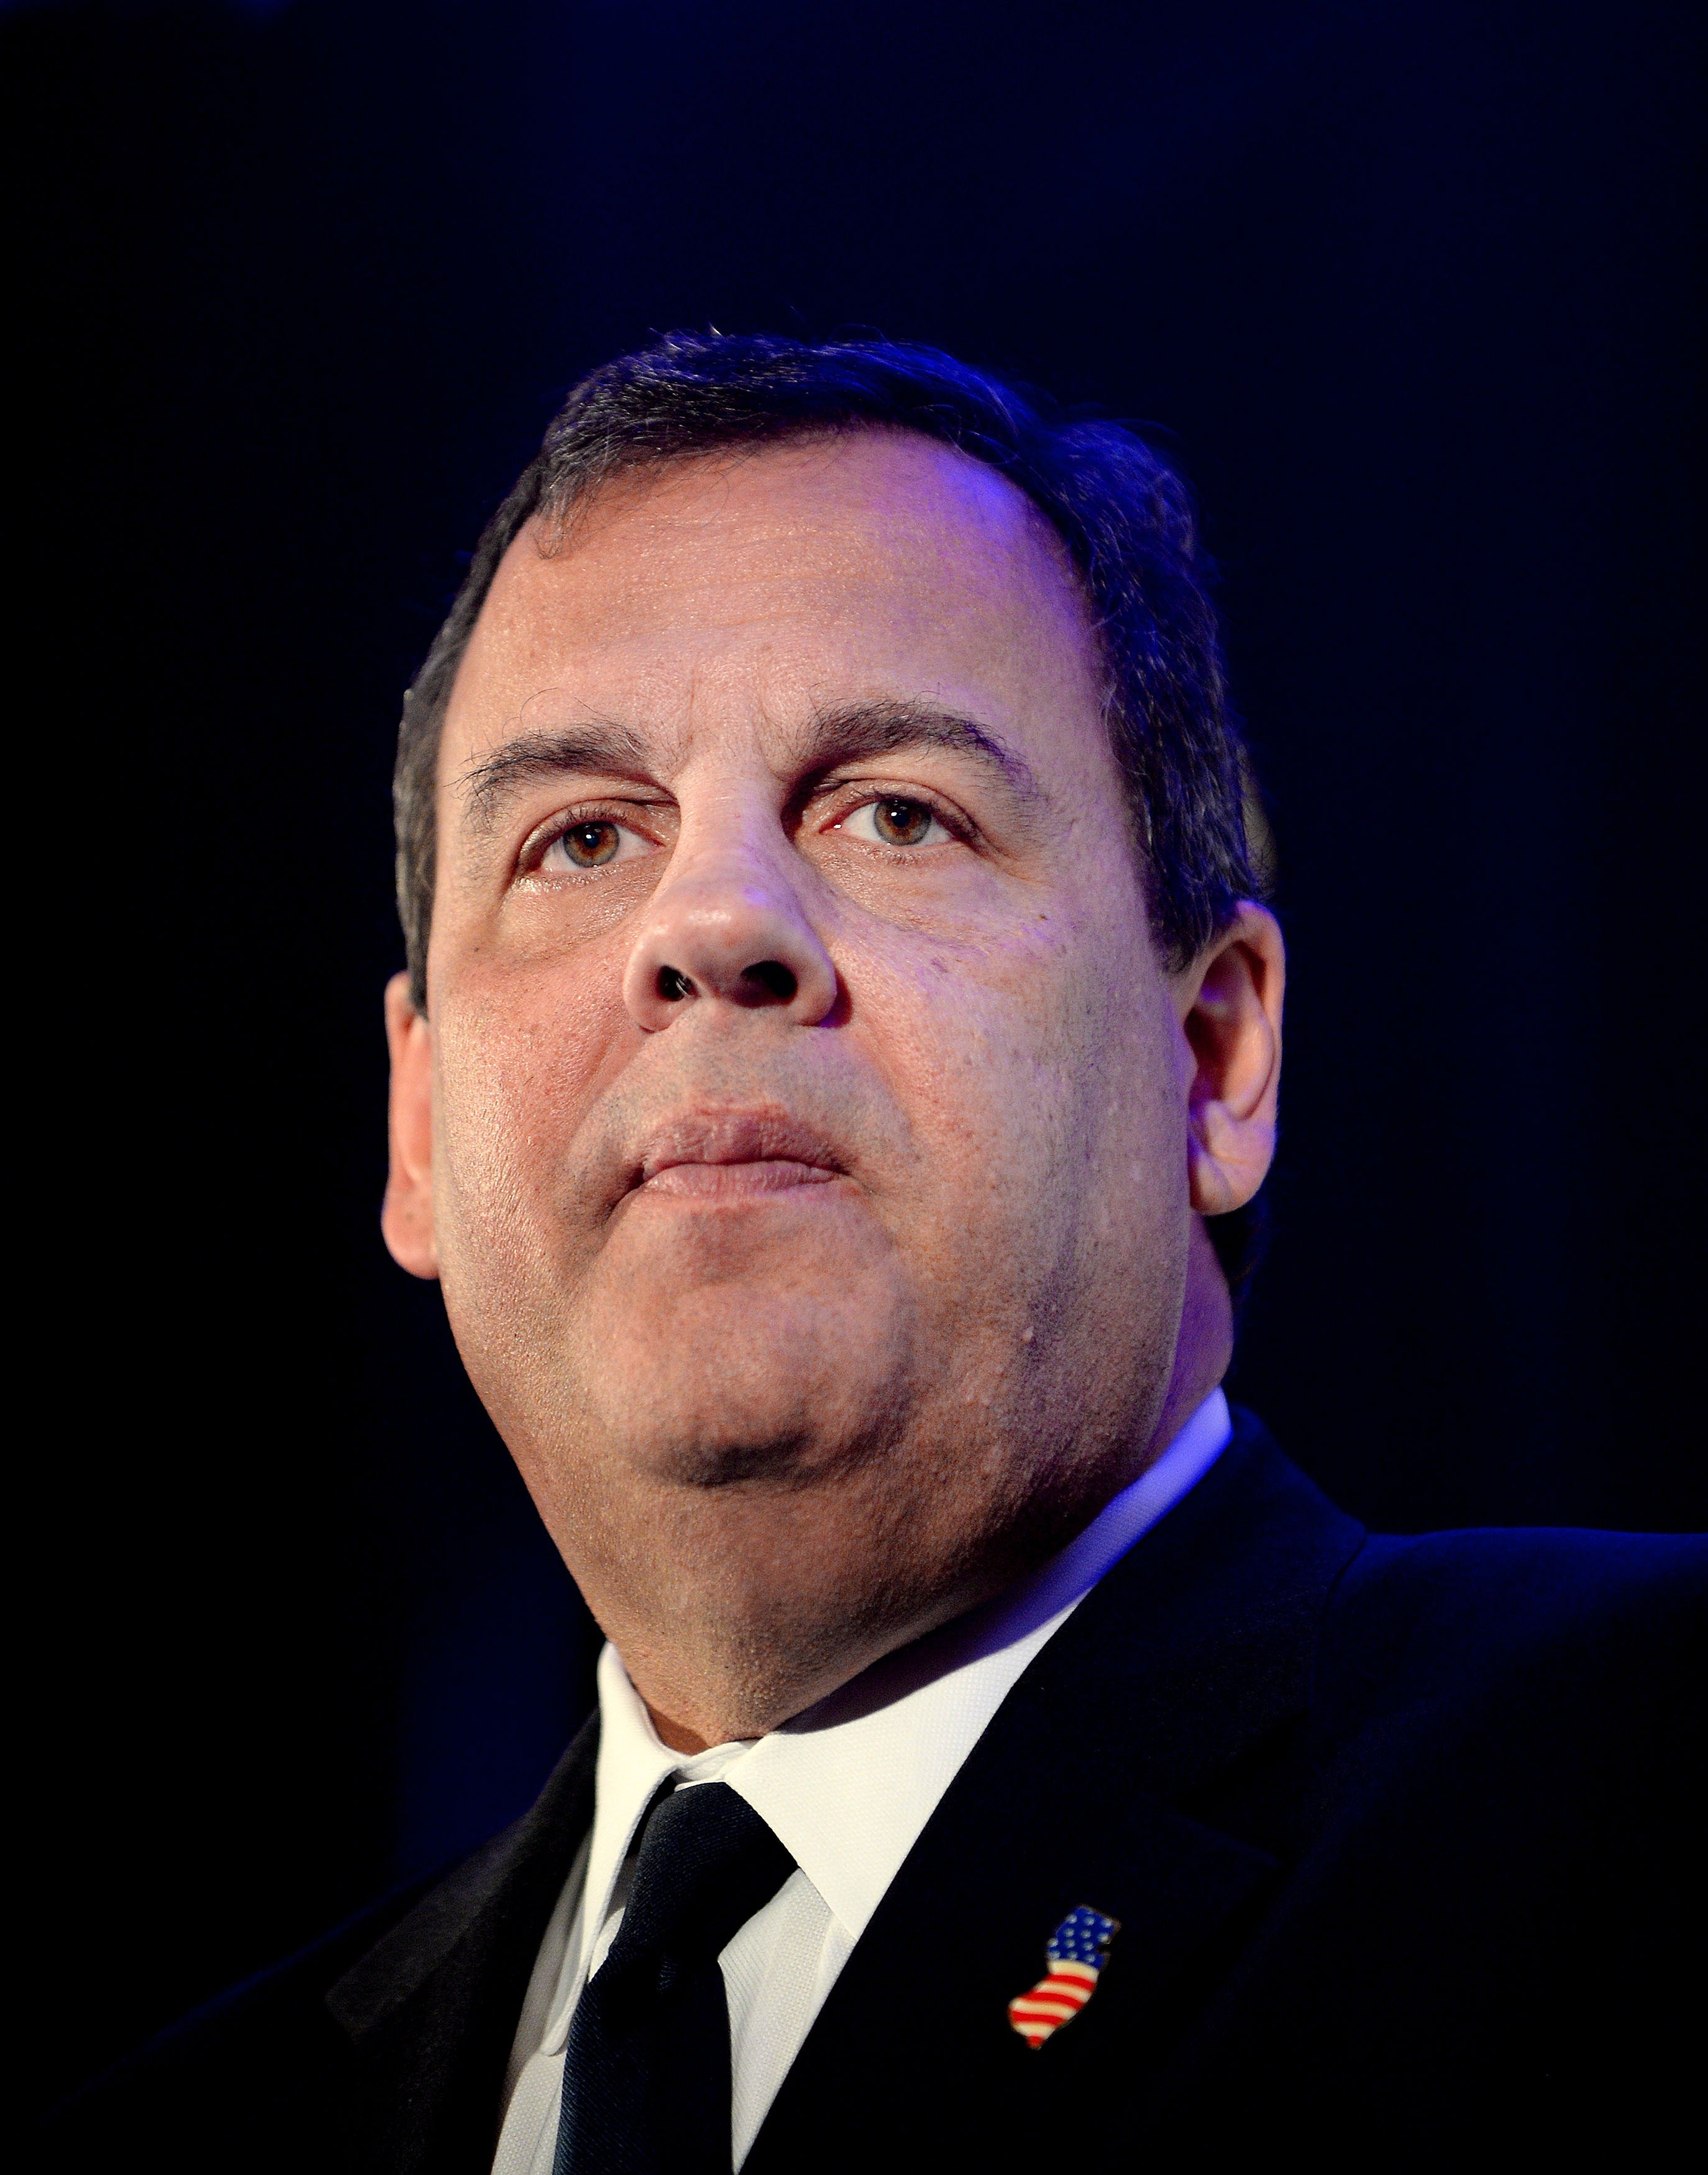 New Jersey Governor Chris Christie addresses VA Consumer Electronics Association during a Leadership Series discussion at the Ritz-Carlton on May 1, 2015 in McLean, Virginia.